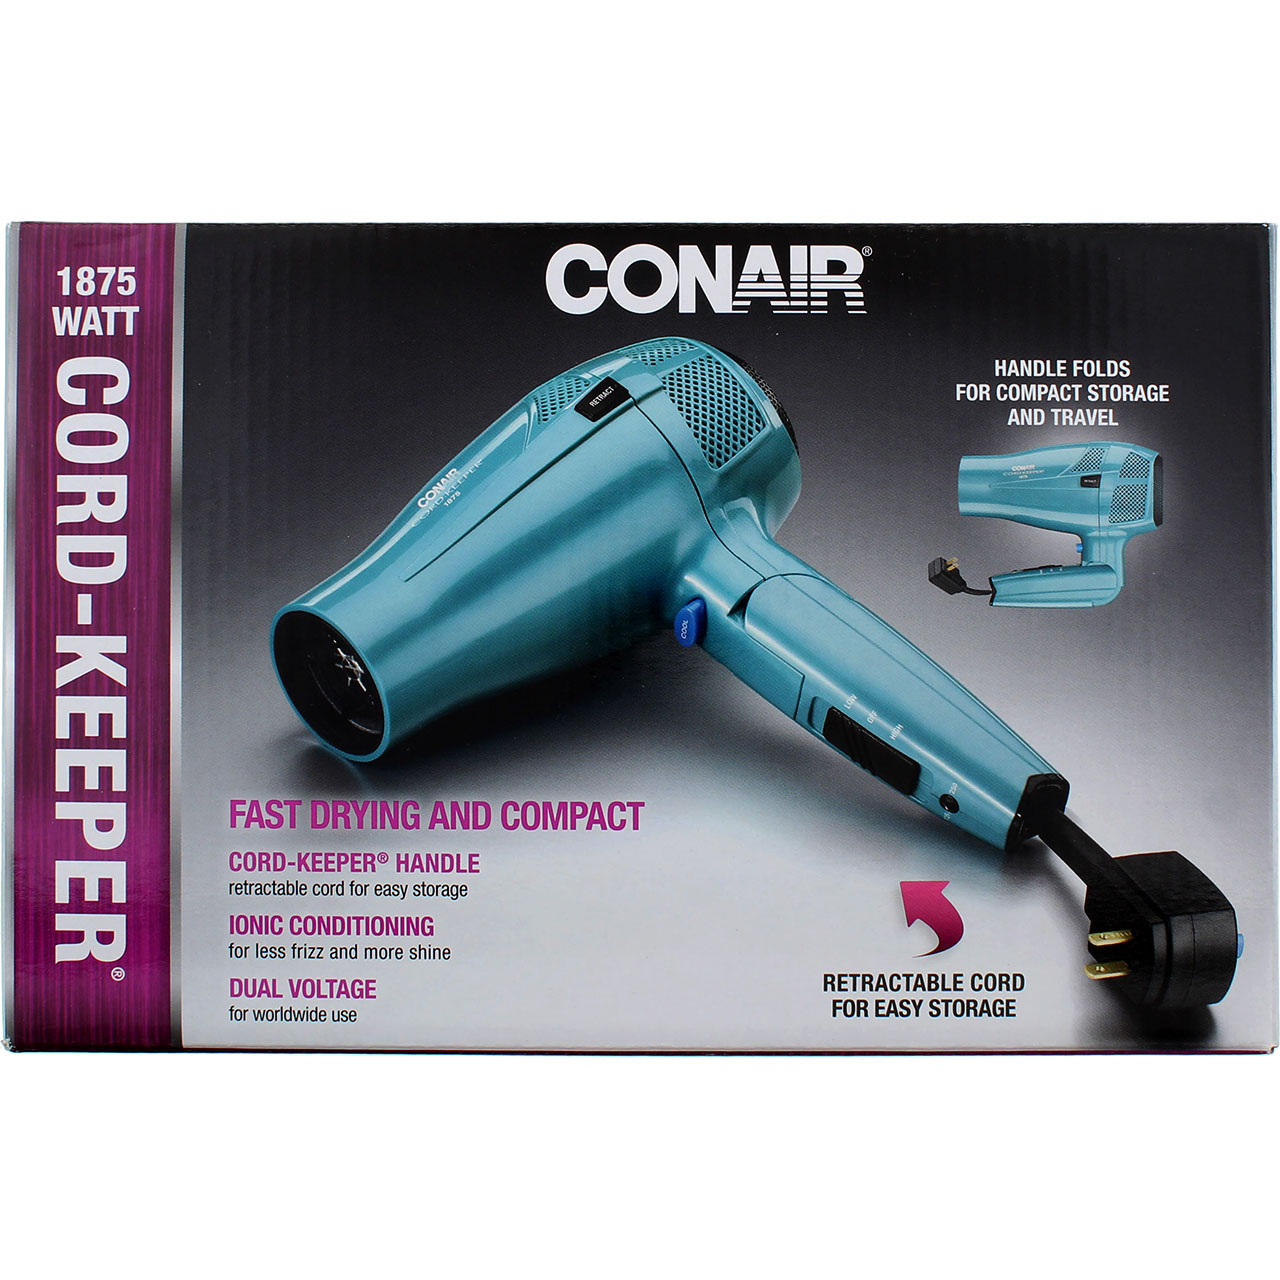 Conair Cord-Keeper Travel Size Folding Ionic Retractable Cord Hair Dryer, 1875 Watts, Blue - image 1 of 2